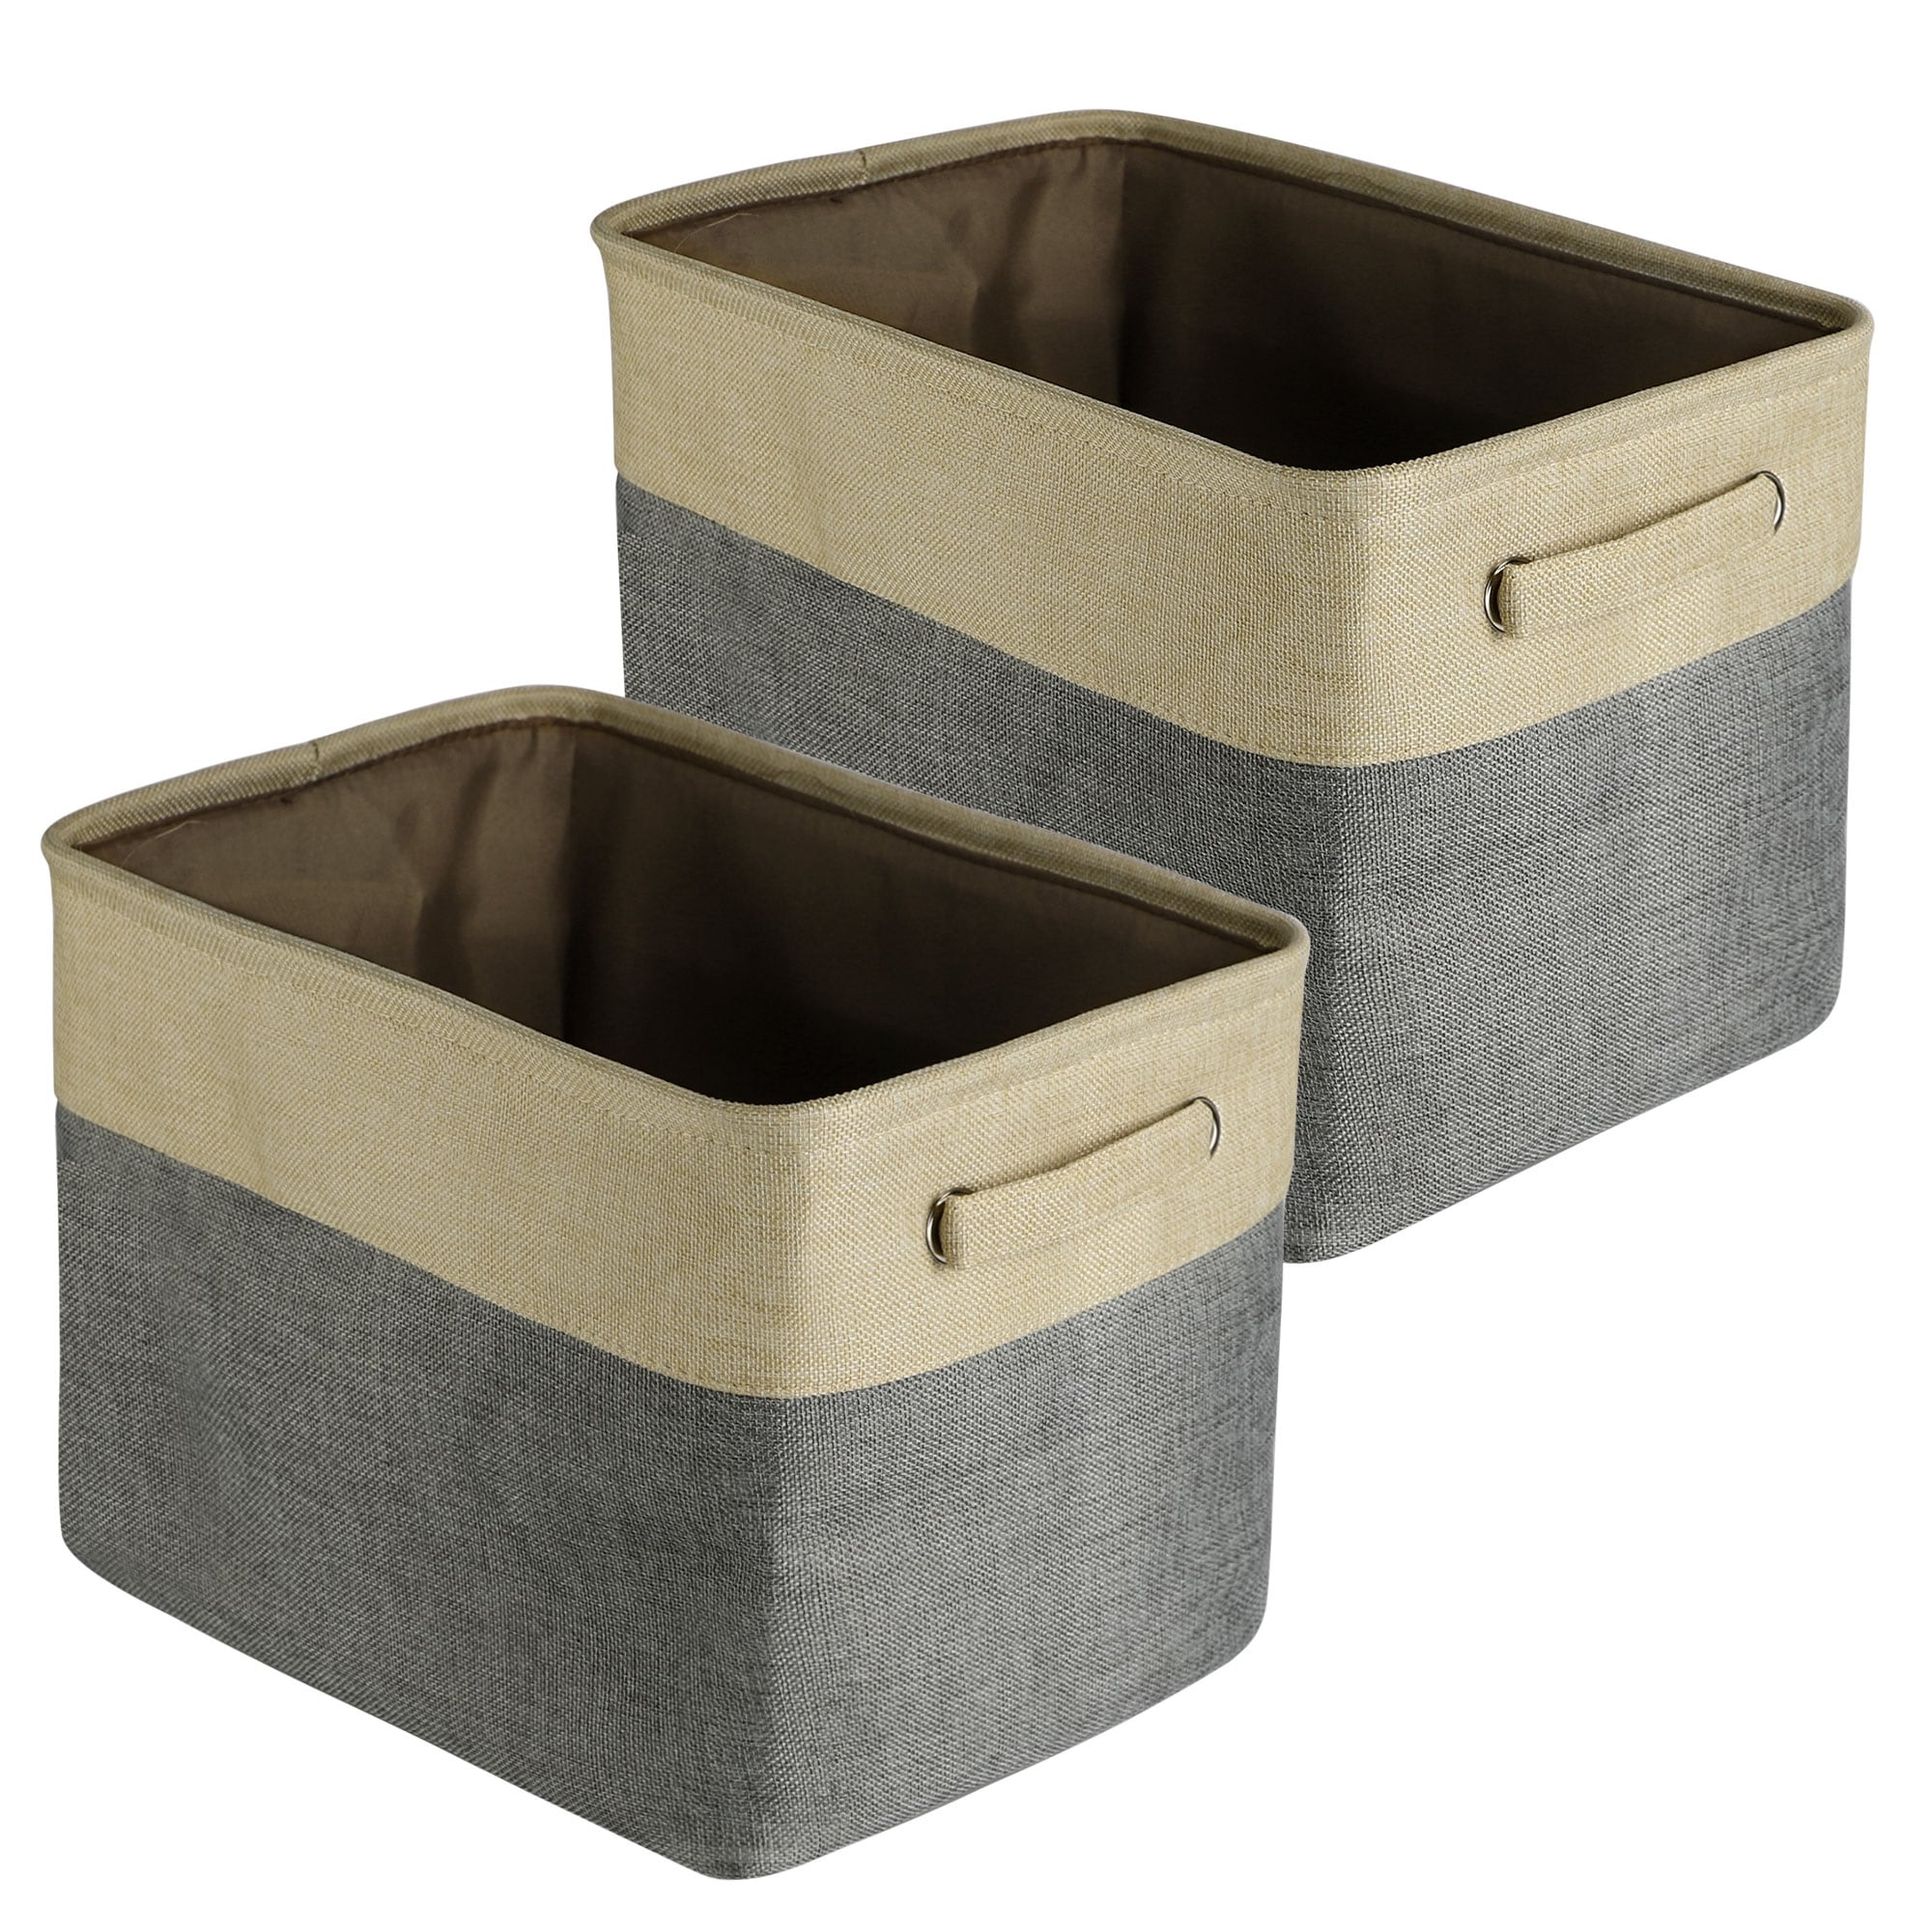 https://ak1.ostkcdn.com/images/products/is/images/direct/97dbc94fe43d9f23240ceab275363193a040944d/2Pcs-Foldable-Storage-Basket%2C-Fabric-Collapsible-Box-with-Handle.jpg